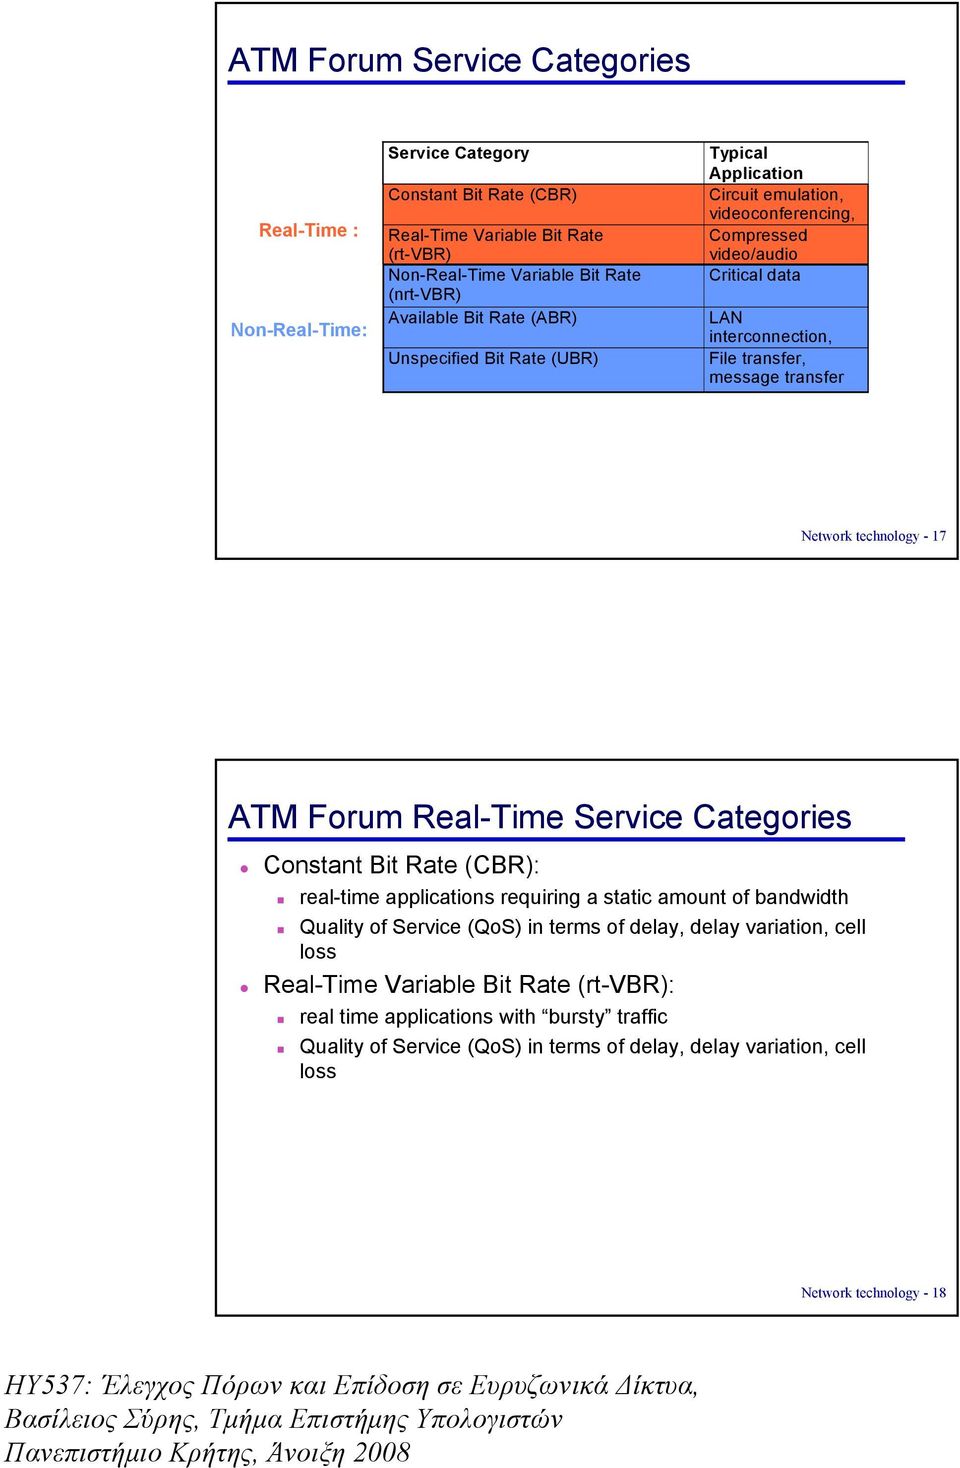 Network technology - 17 ATM Forum Real-Time Service Categories Constant Bit Rate (CBR): real-time applications requiring a static amount of bandwidth Quality of Service (QoS) in terms of